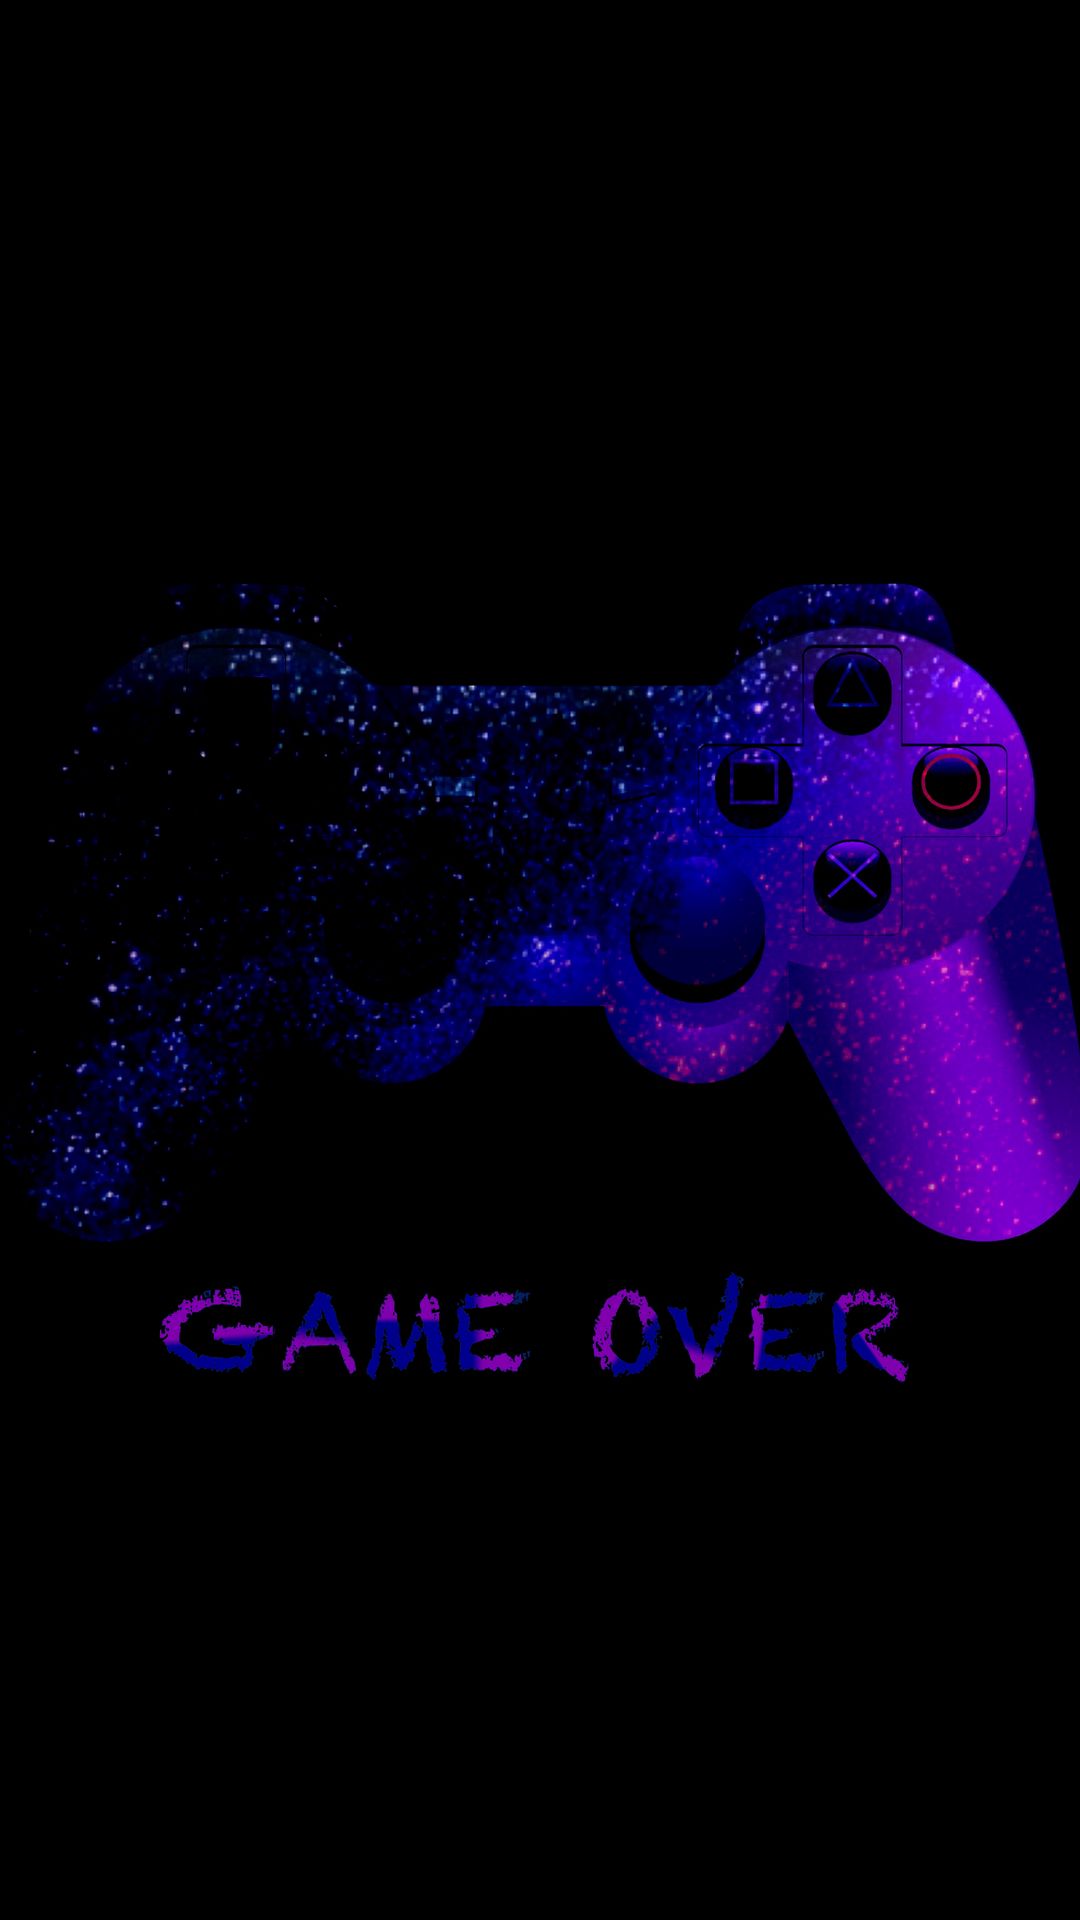 Download wallpaper 1080x1920 game over, joystick, controller, gamepad, neon samsung galaxy s s note, sony xperia z, z z z htc one, lenovo vibe HD background